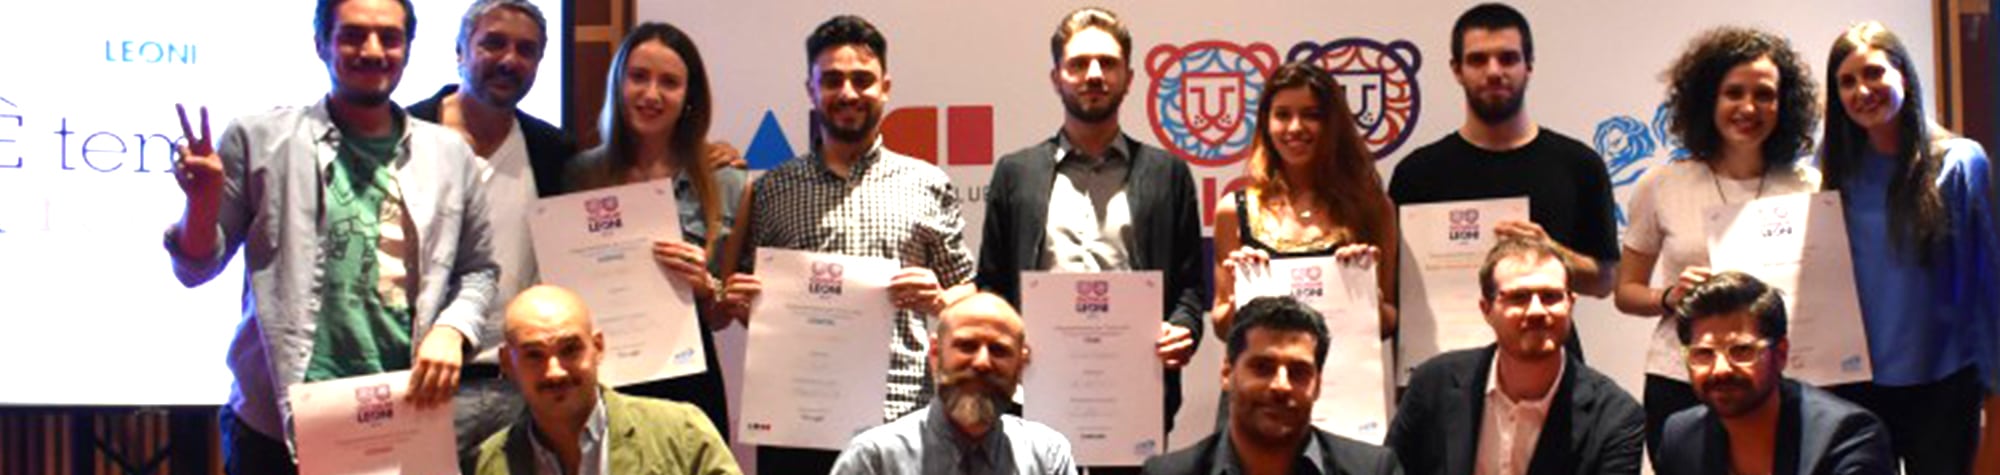 Noesis under-30 colleague wins the Italy Young Lions 2018